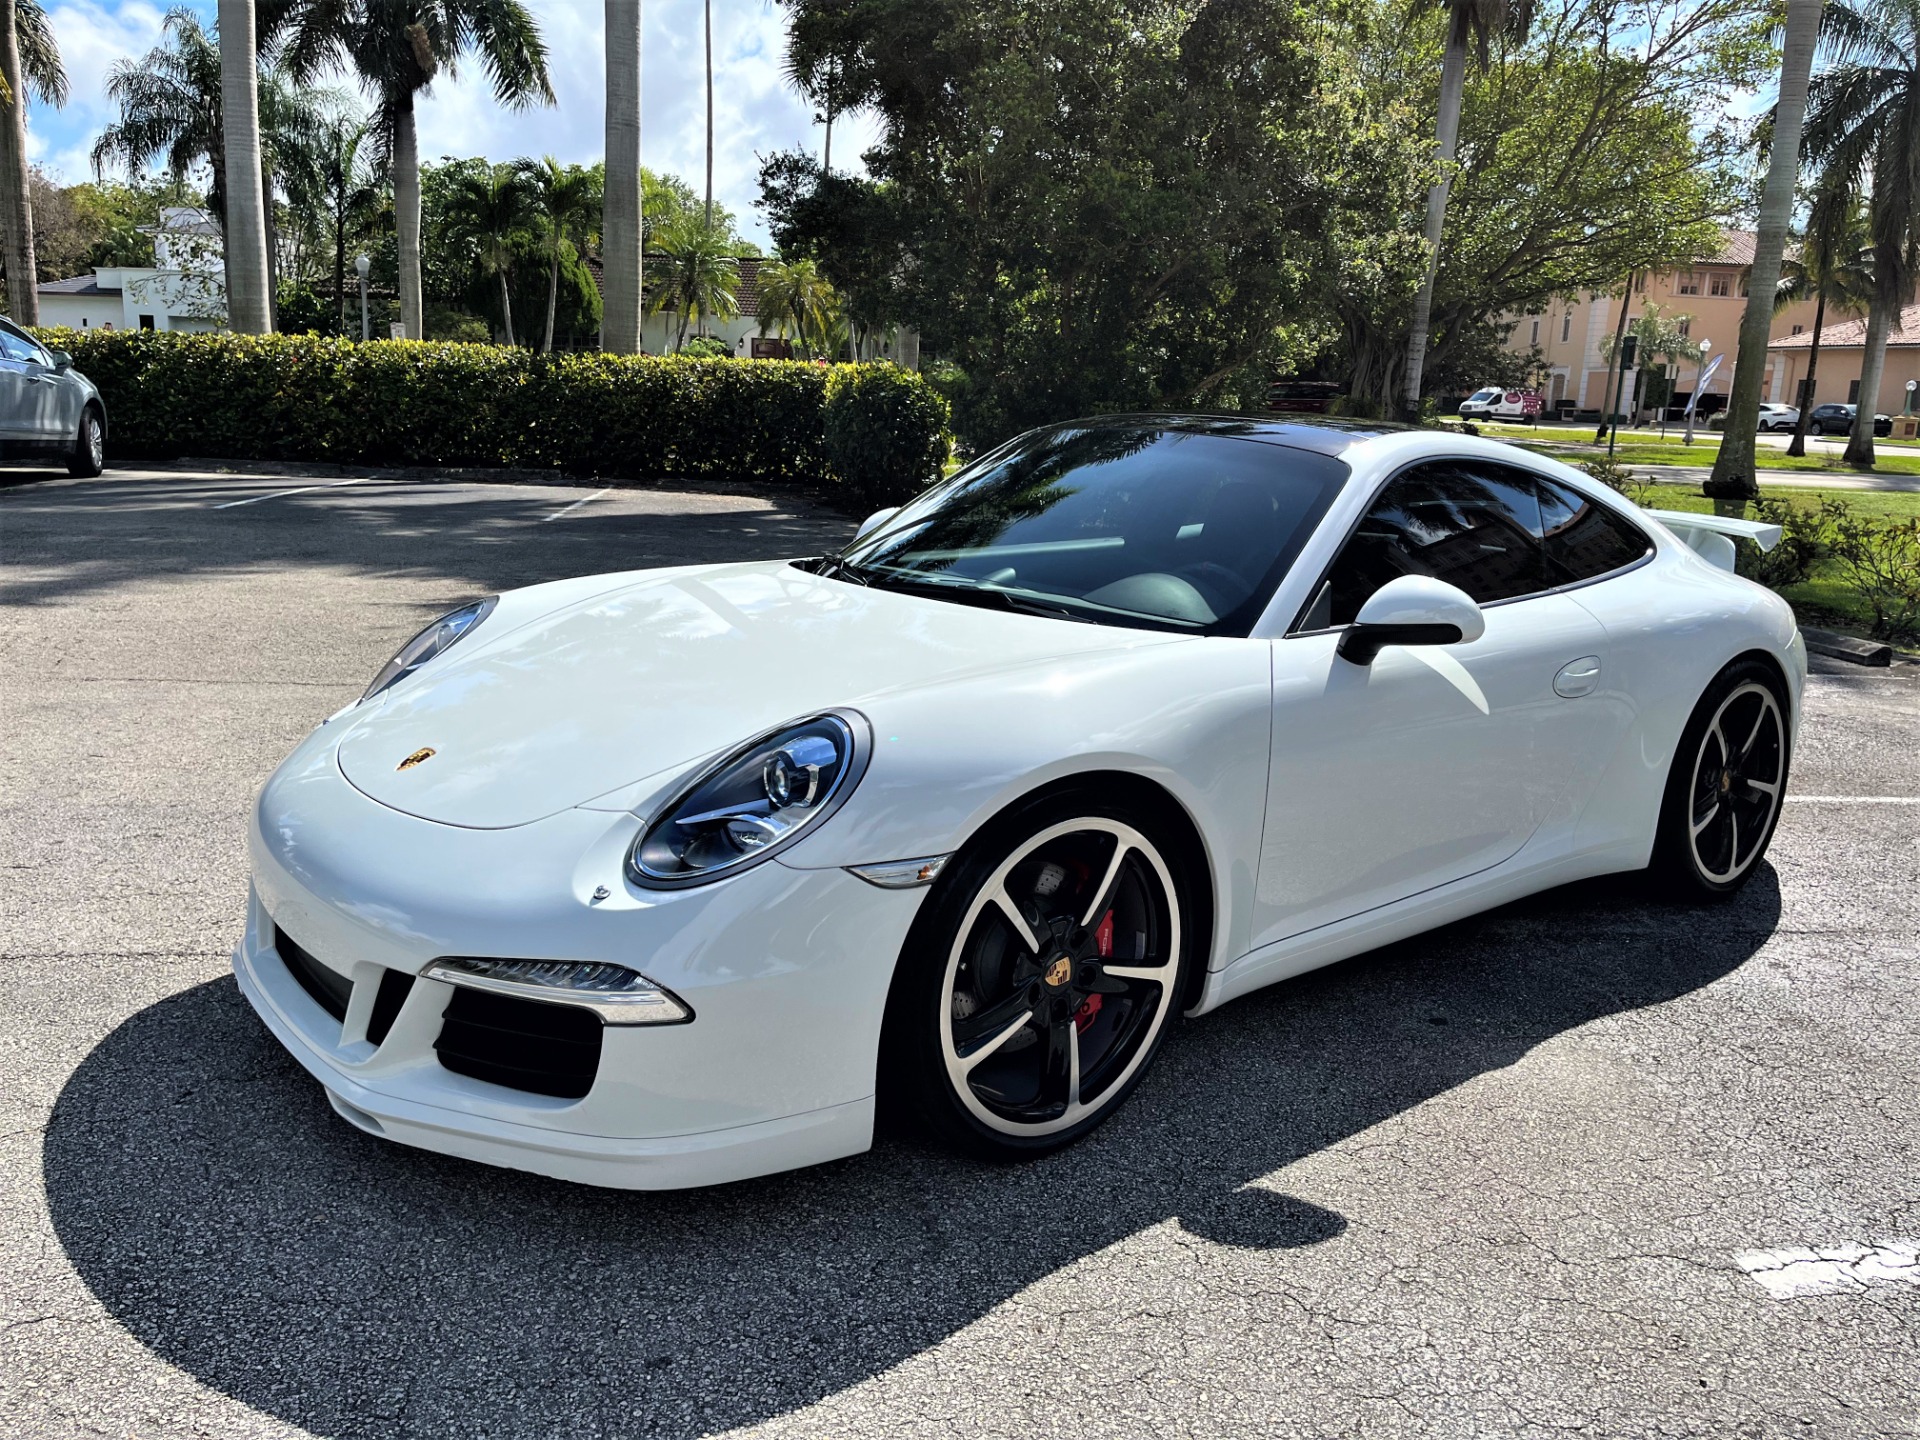 Used 2014 Porsche 911 Carrera S for sale Sold at The Gables Sports Cars in Miami FL 33146 2